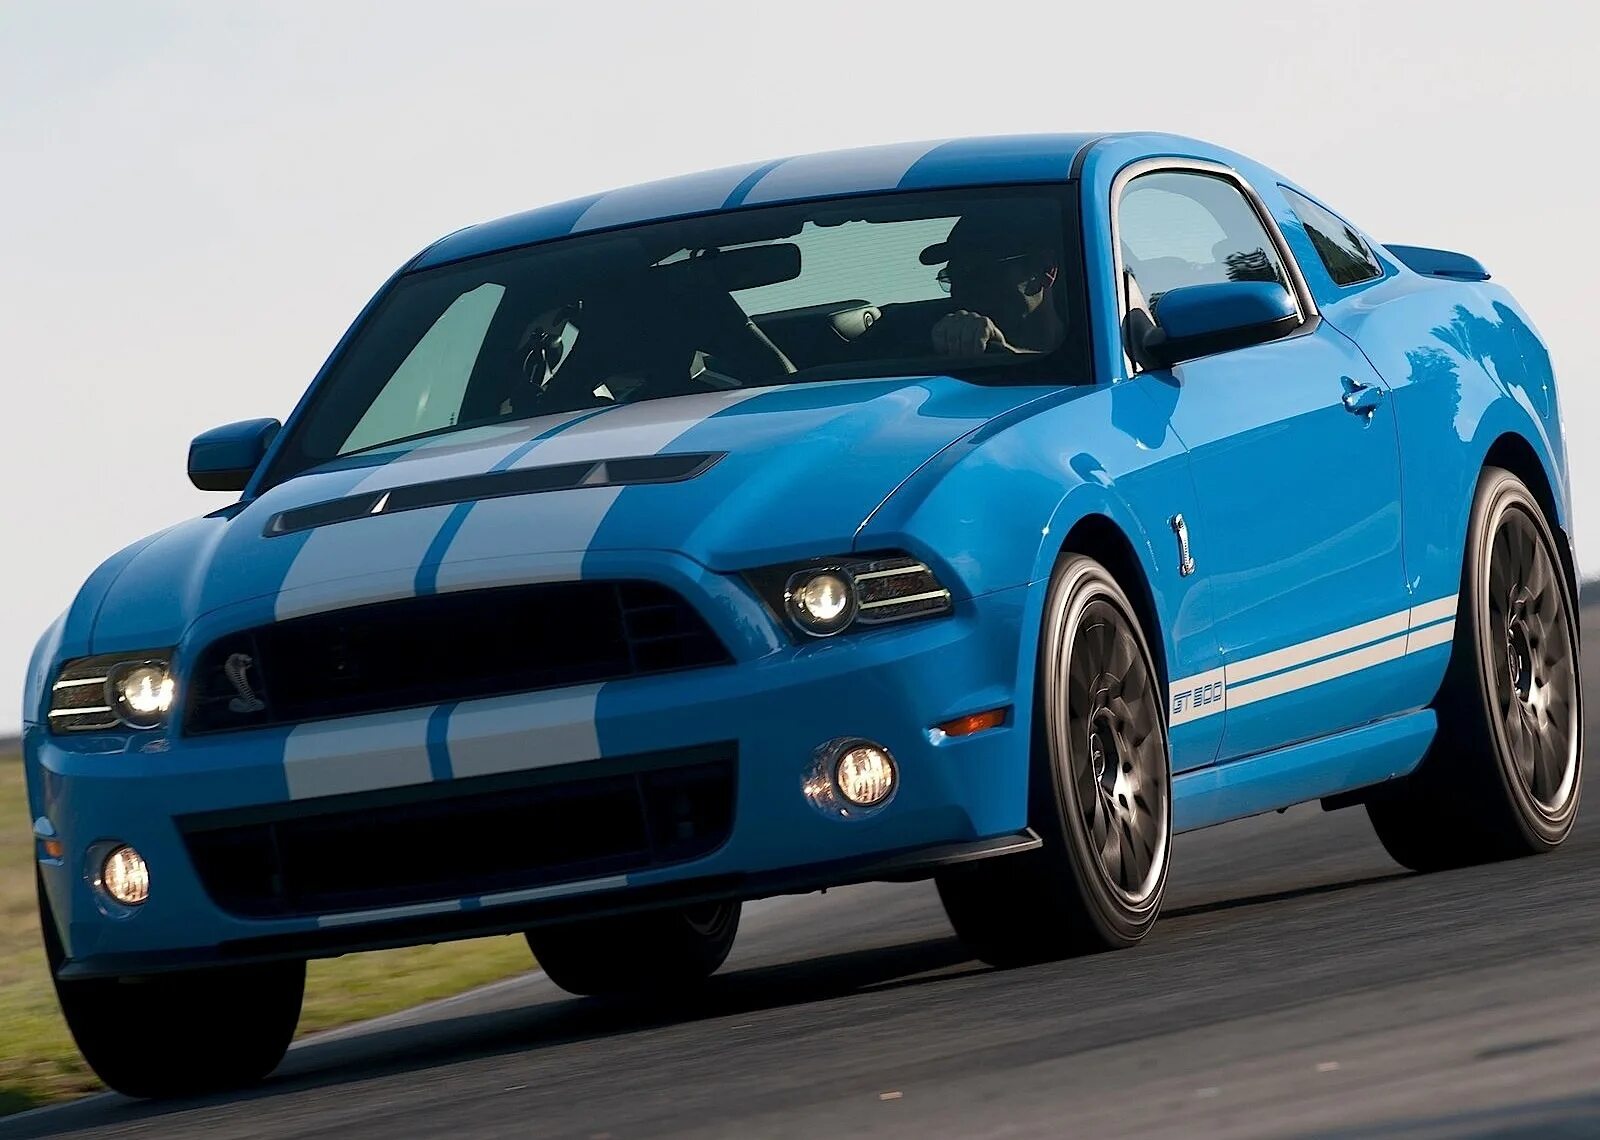 Мустанг объем. Форд Мустанг gt 500 Shelby. Ford Shelby gt500. Ford Mustang Shelby gt500 2013. Ford Mustang Shelby gt500 2012.